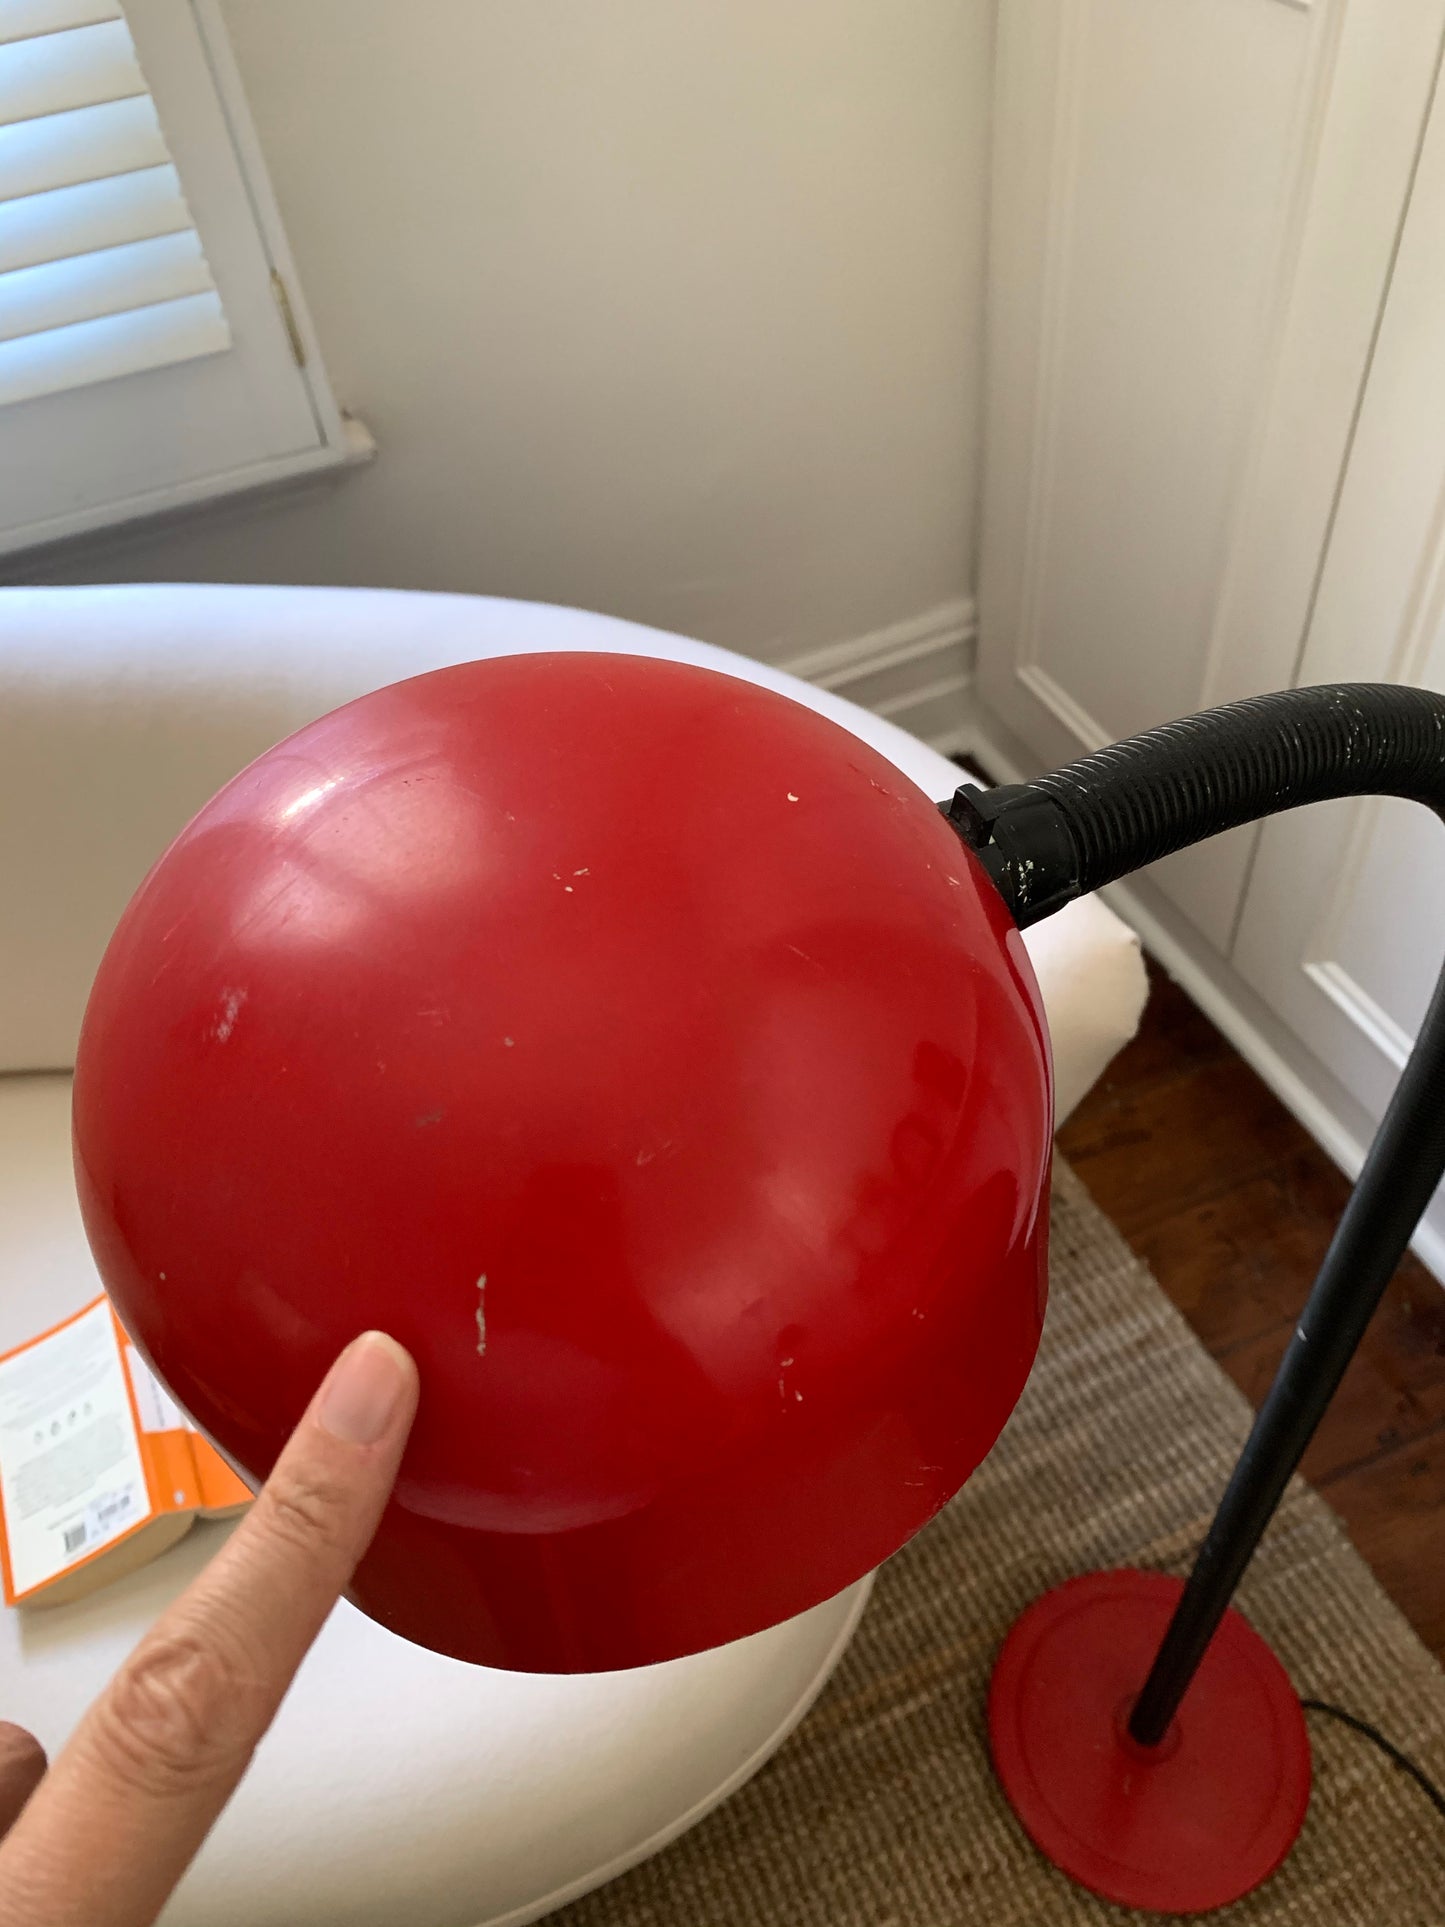 Red and Black Oslo Floor Lamp